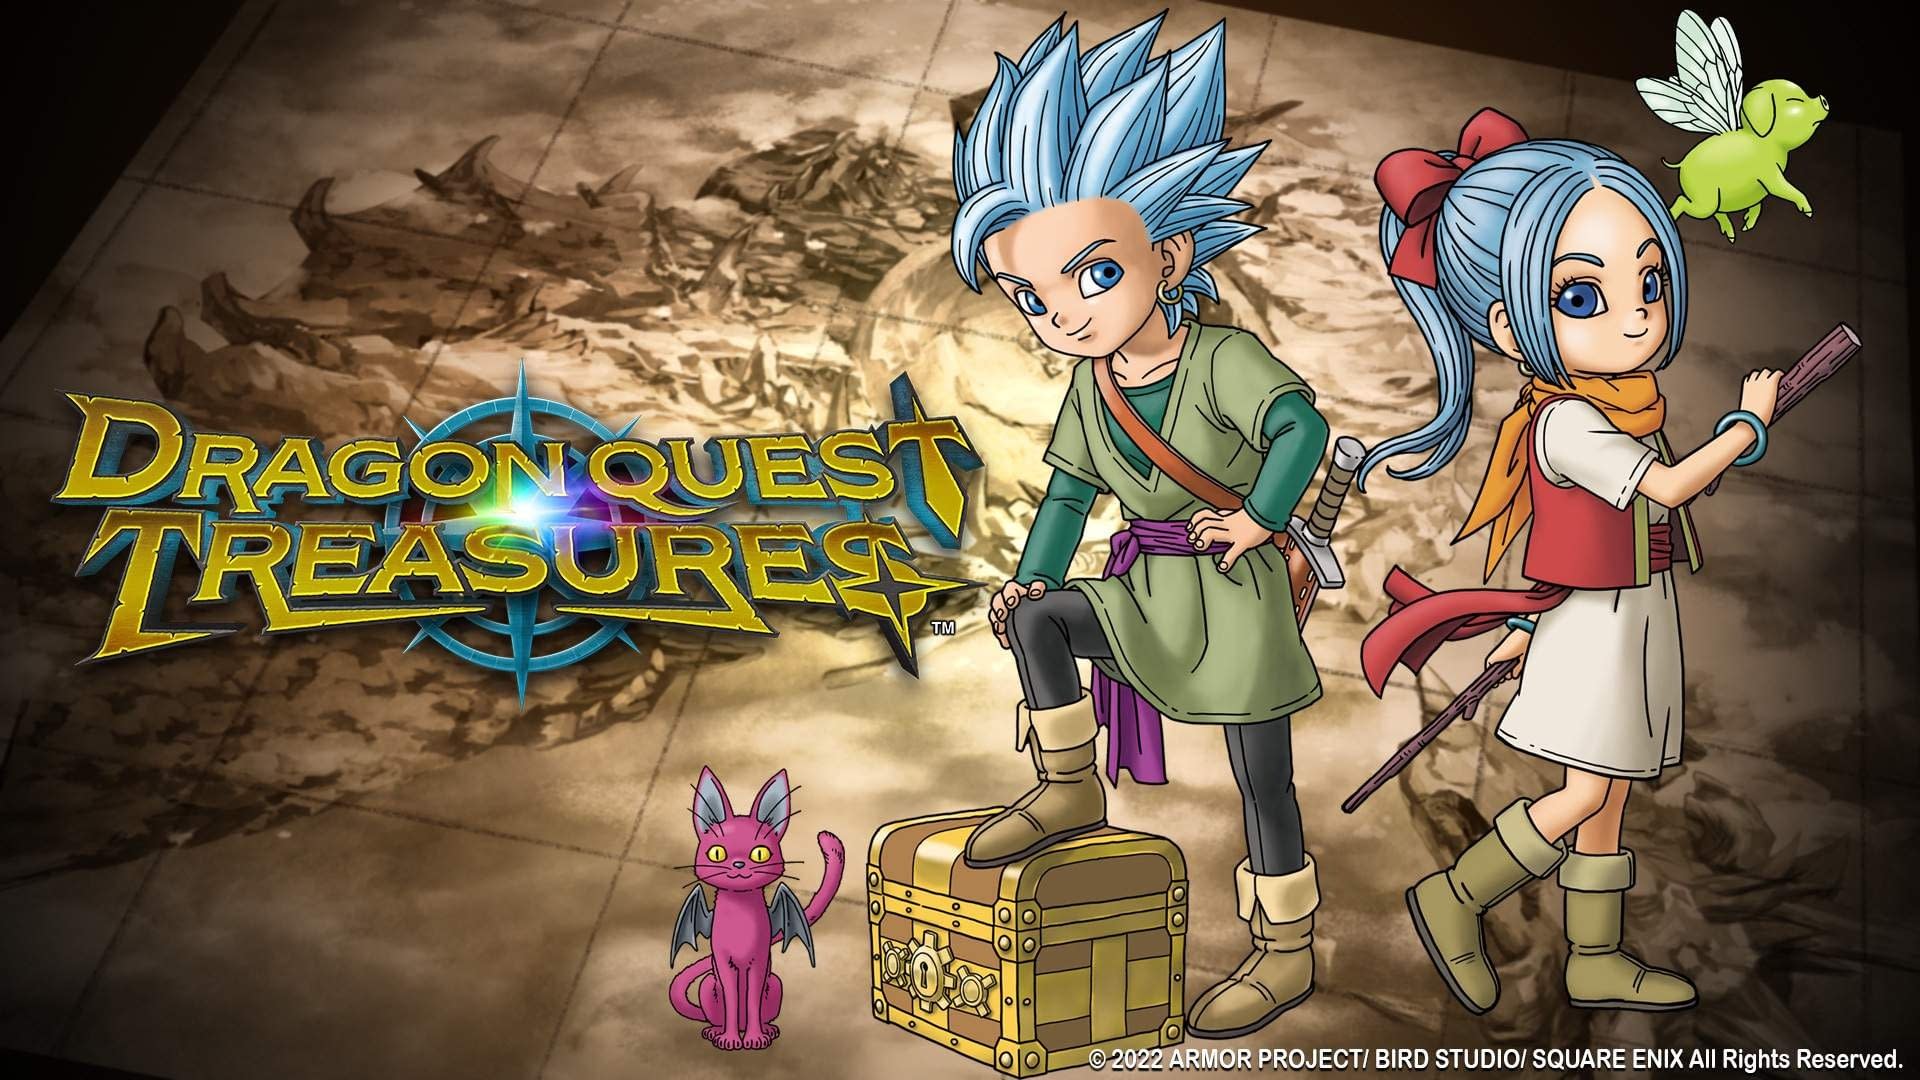 Gameplay Overview Trailer for Dragon Quest Treasures Released